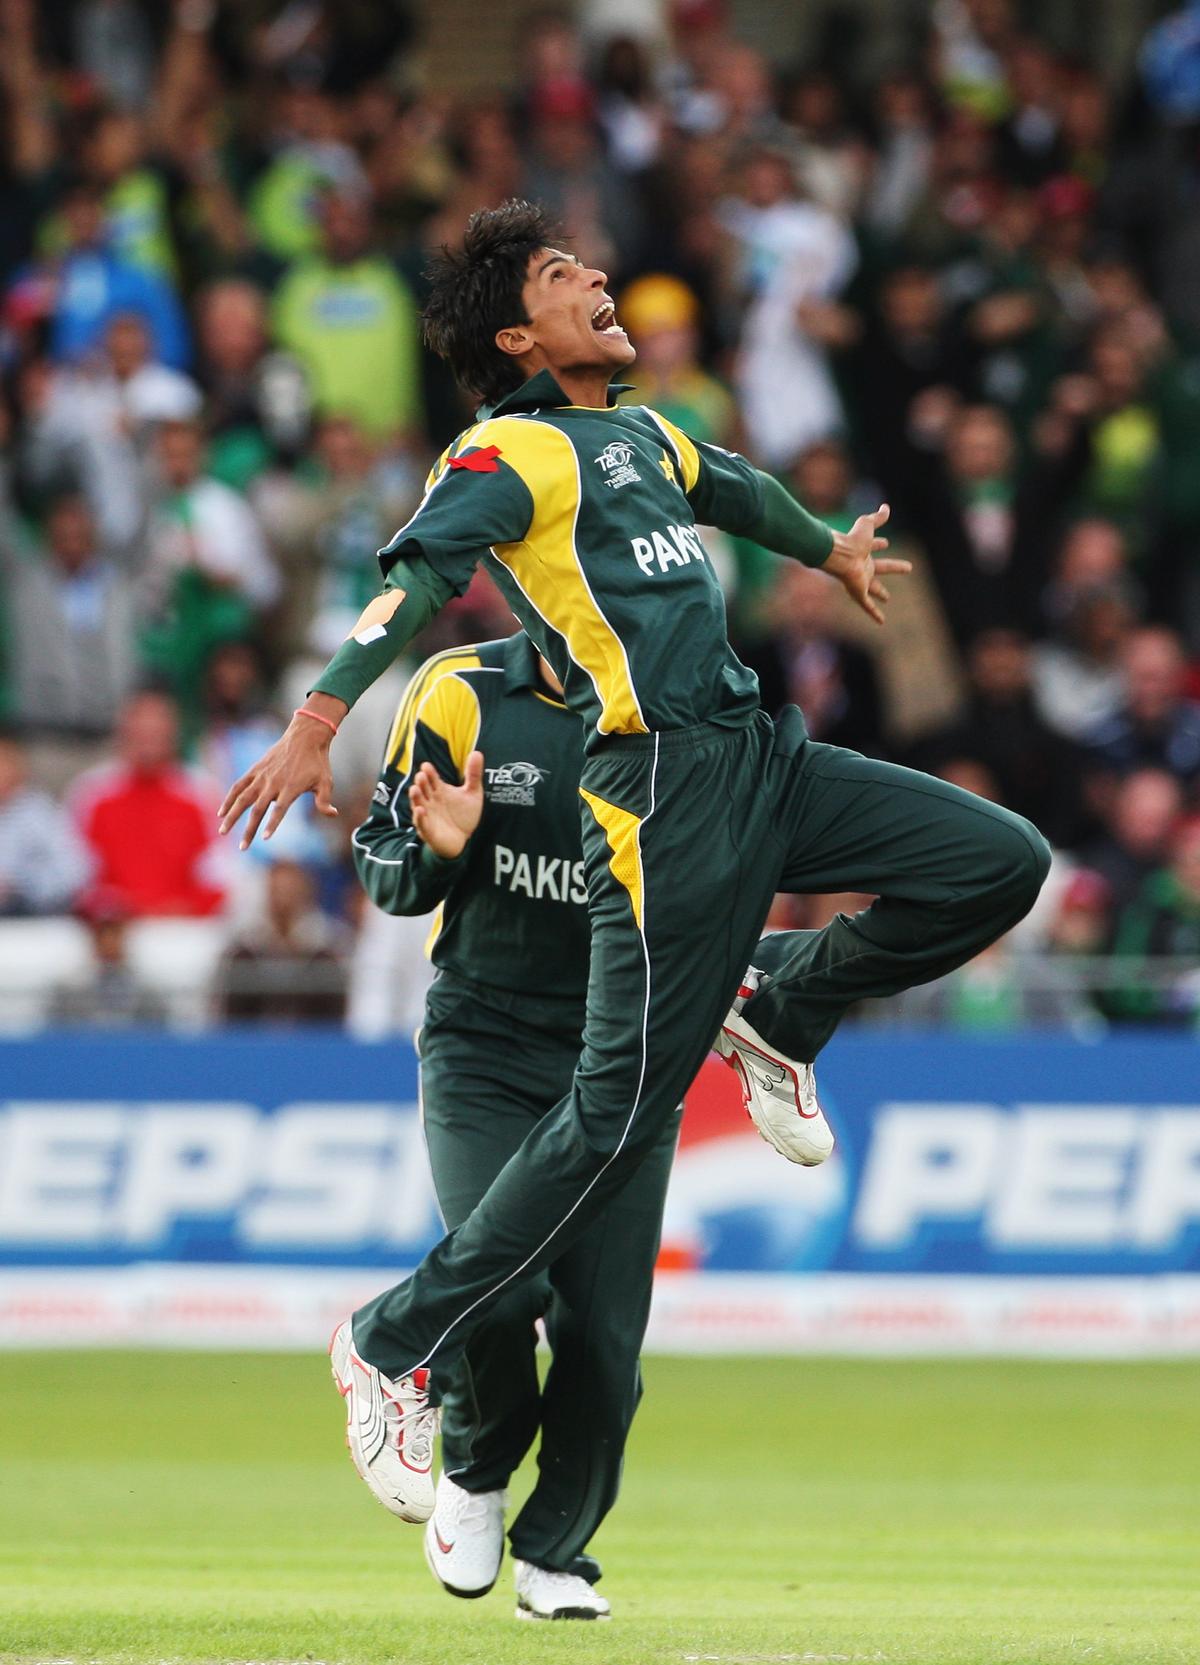 Pakistan celebrates the wicket of Graeme Smith of South Africa during the ICC World Twenty20 semifinal between against South Africa at Trent Bridge on June 18, 2009 